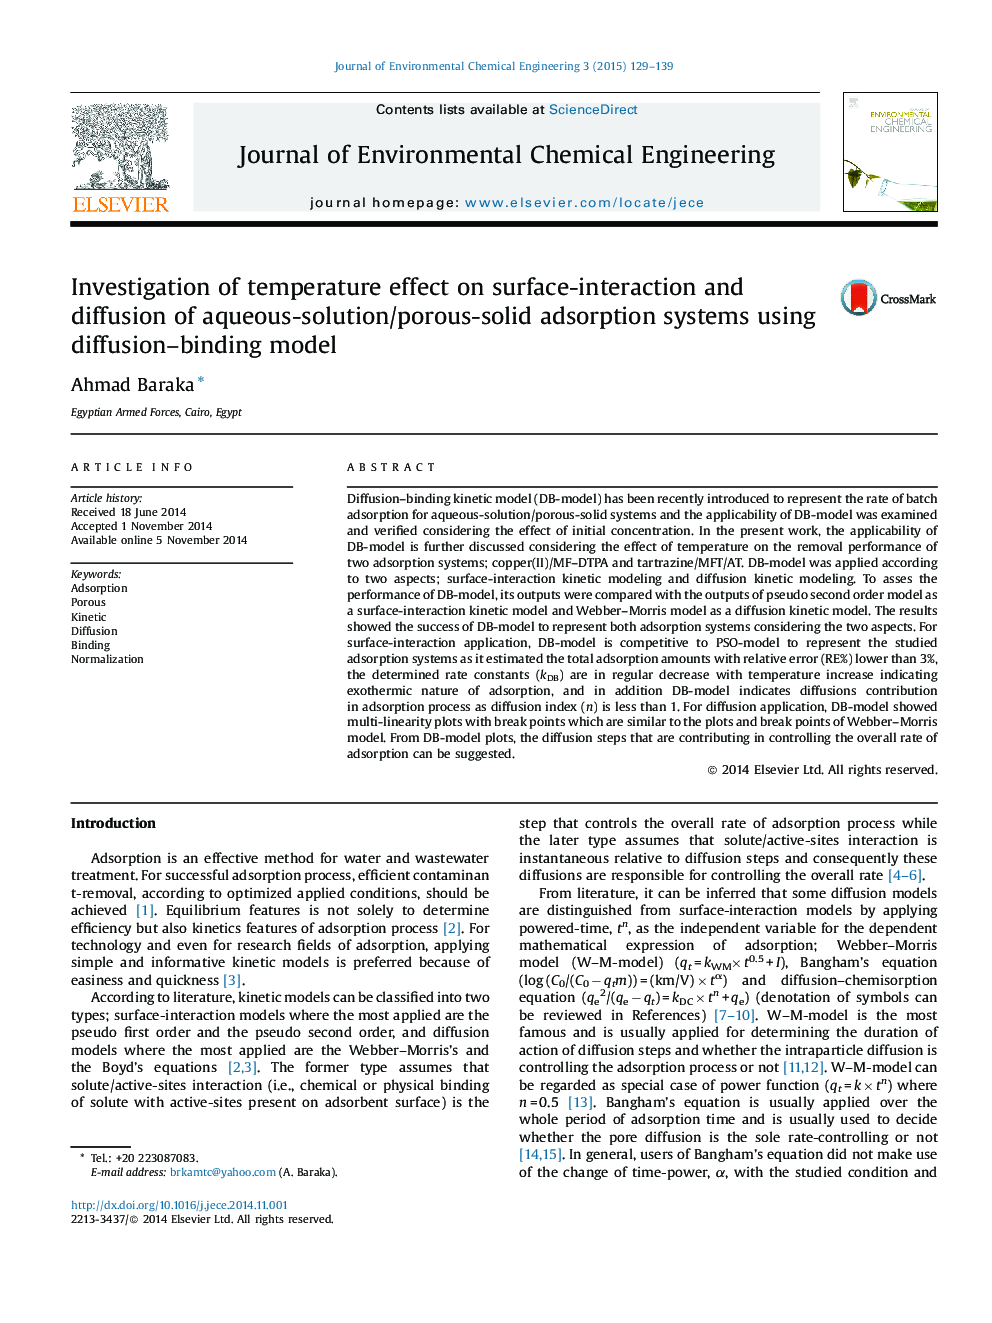 Investigation of temperature effect on surface-interaction and diffusion of aqueous-solution/porous-solid adsorption systems using diffusion–binding model